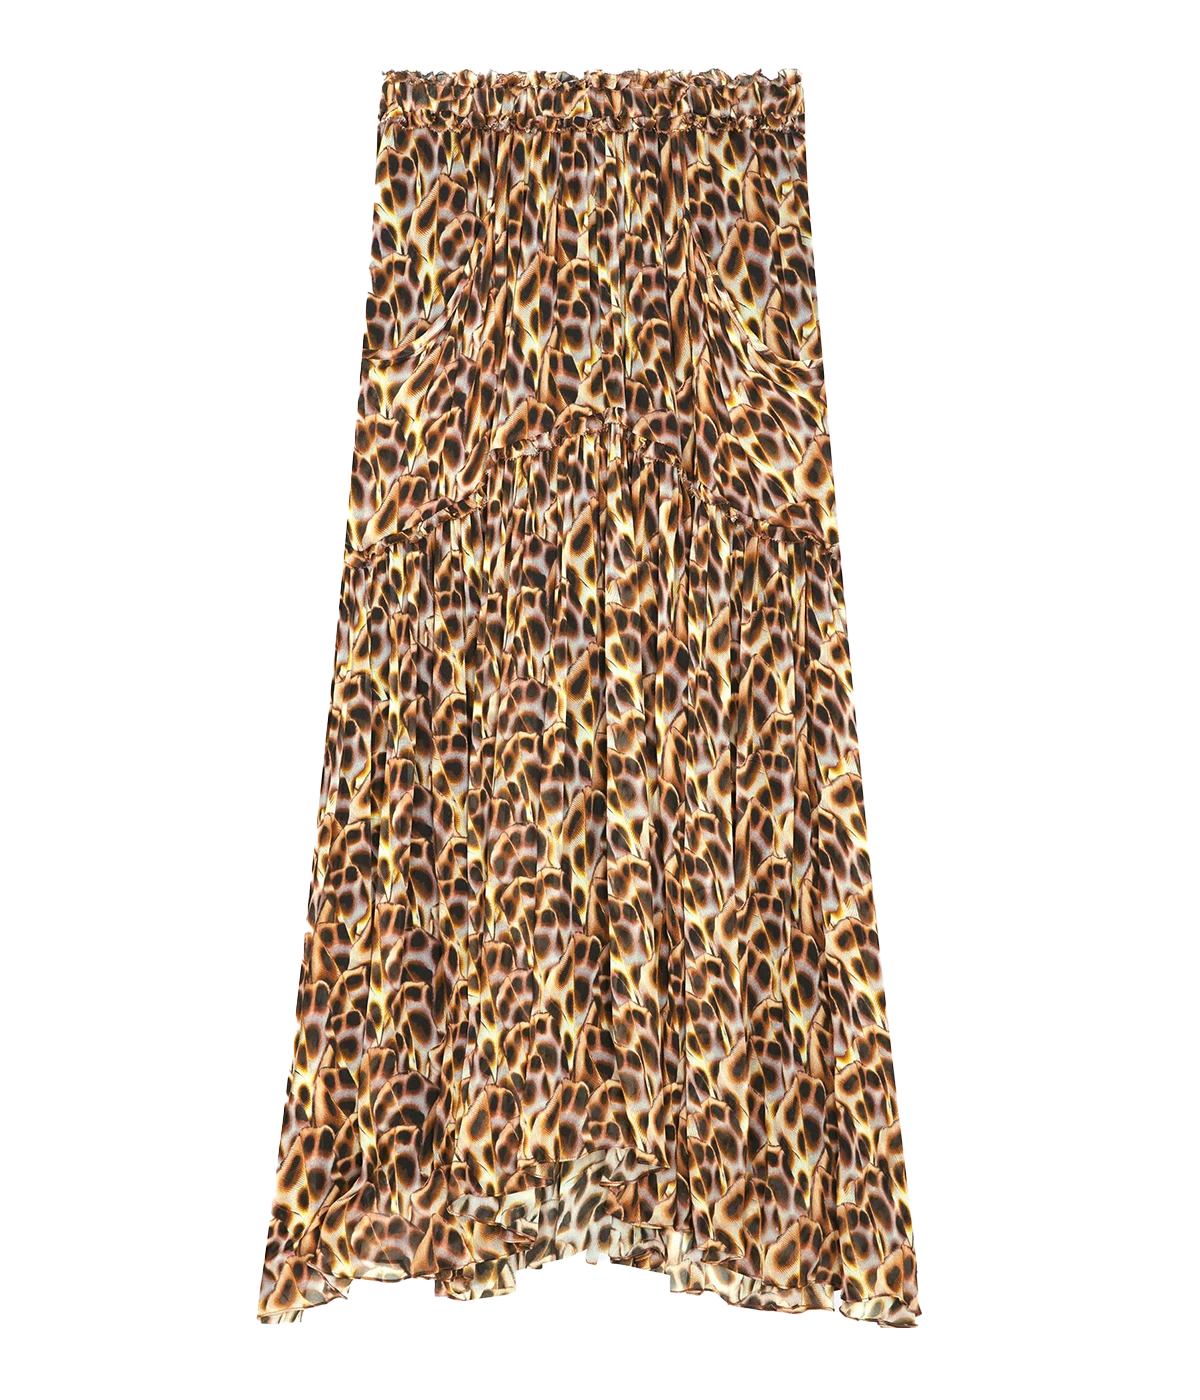 Flouncy tiered midi skirt by Isabel Marant. Features an elasticated waist and pockets for ultimate comfort. Timeless leopard print. 